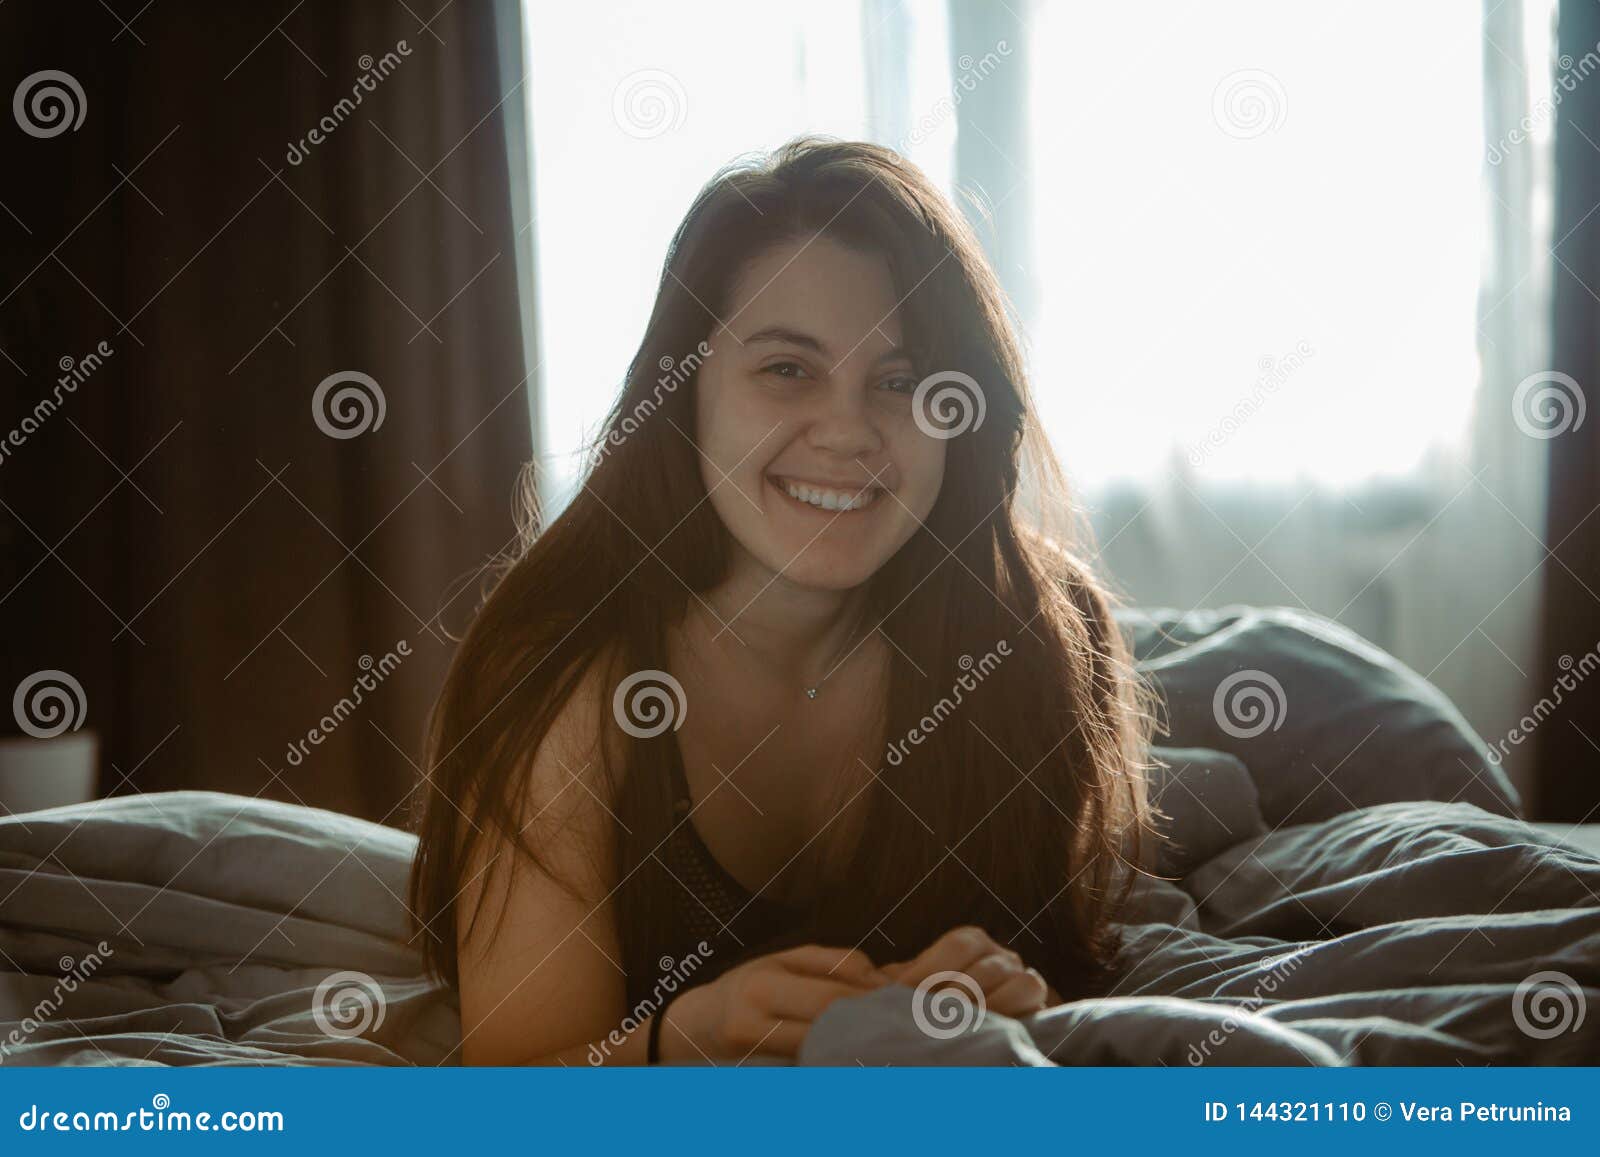 Young Pretty Woman in Black Bra Sitting on Bed. Morning Time Stock